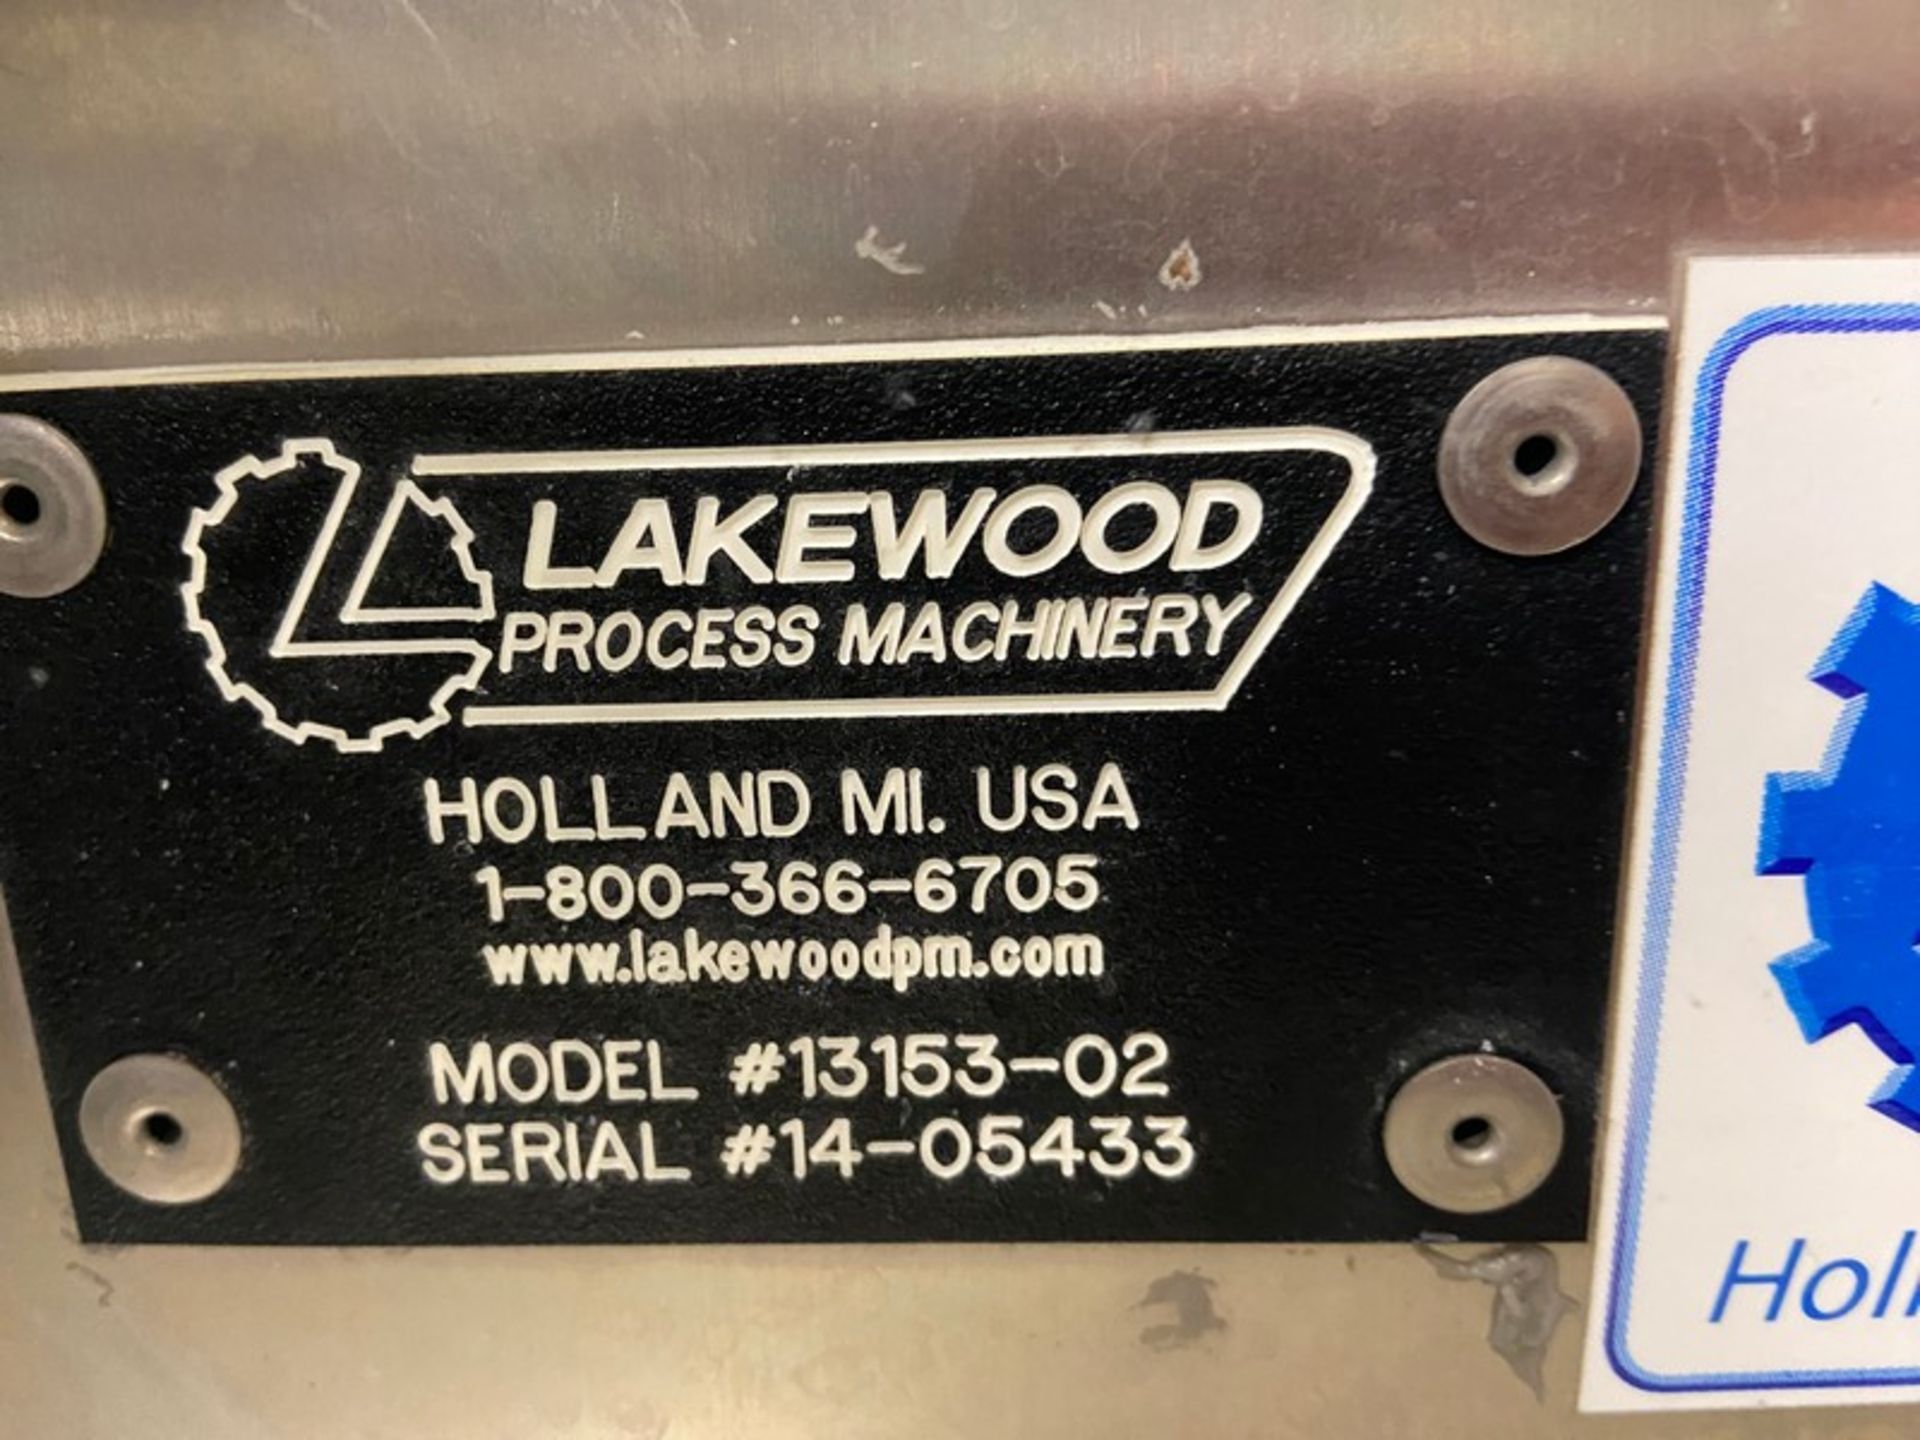 Lakewood Process Machinery S/S Skimmer Conveyor, M/N 13153-02, S/N 14-05433, with Aprox. 42” W S/S - Image 8 of 12